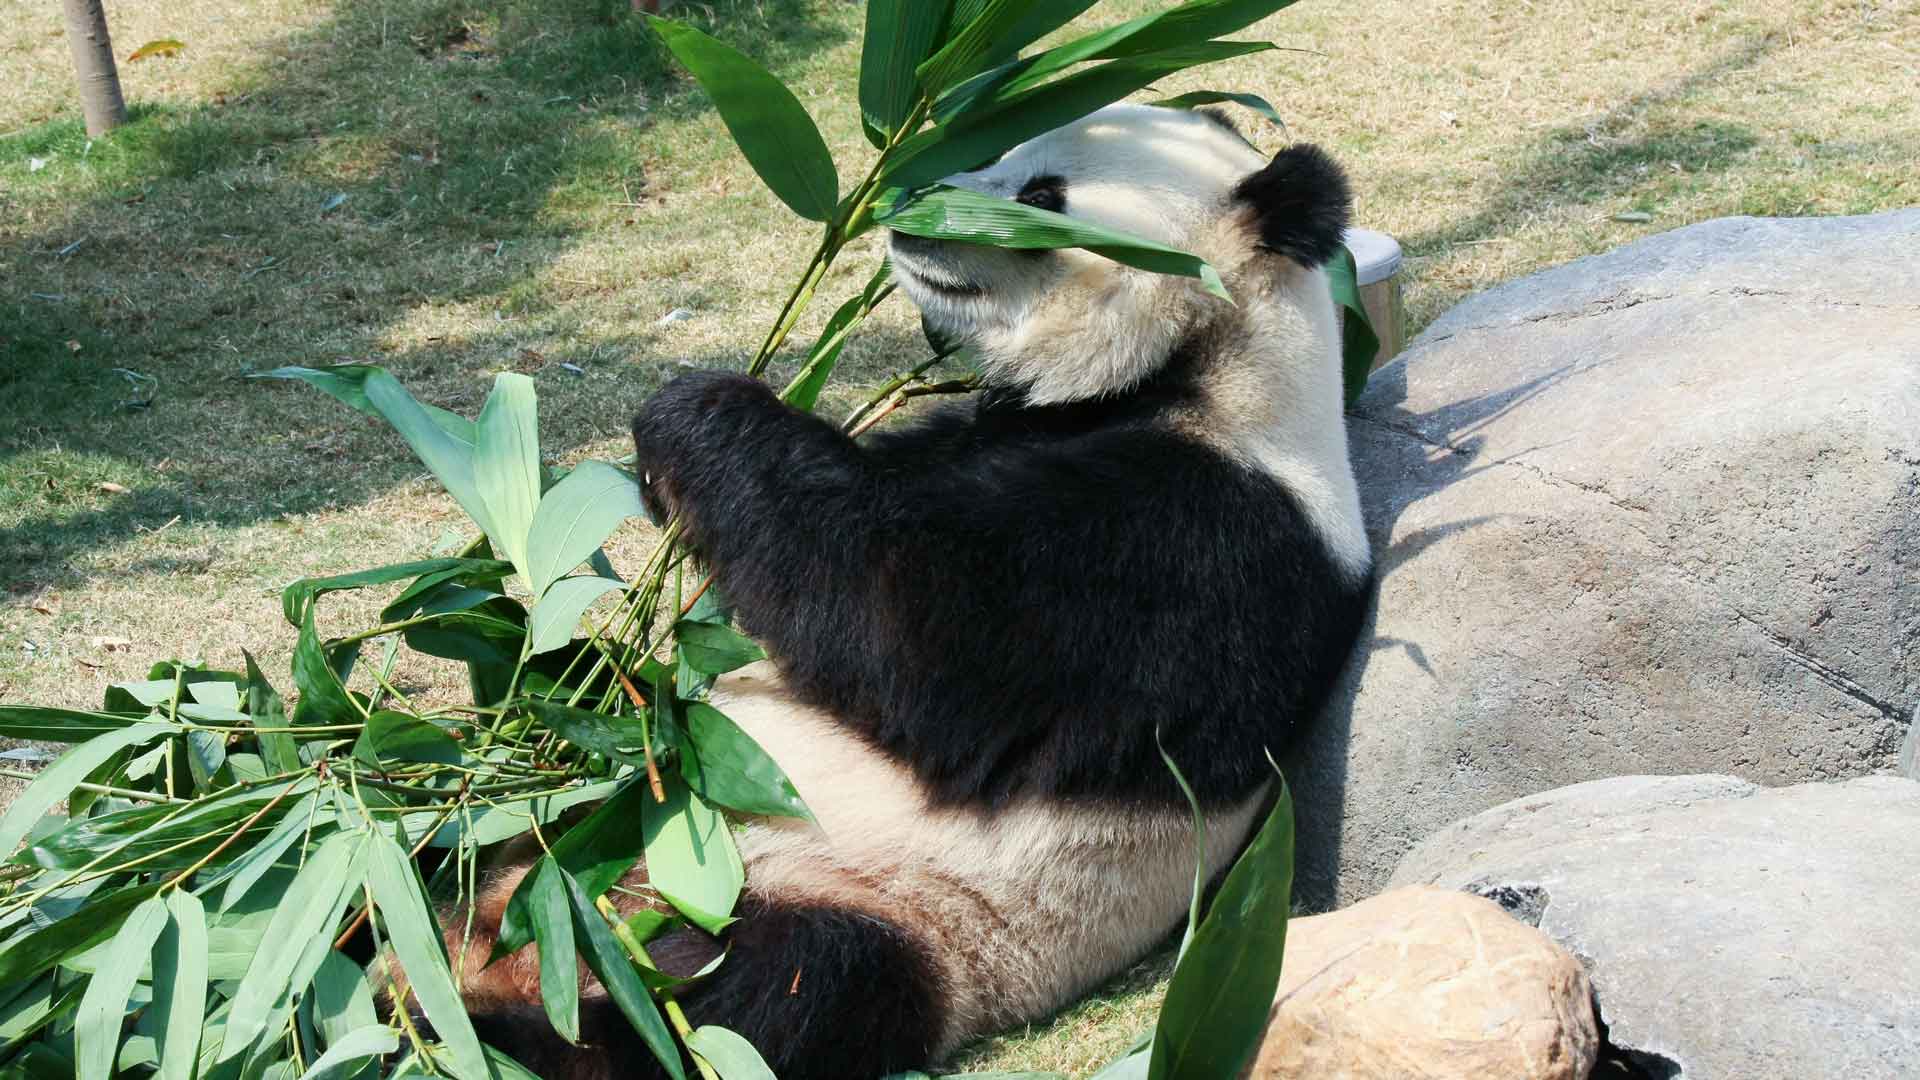 Adobe stock photo of panda eating shoots and leaves